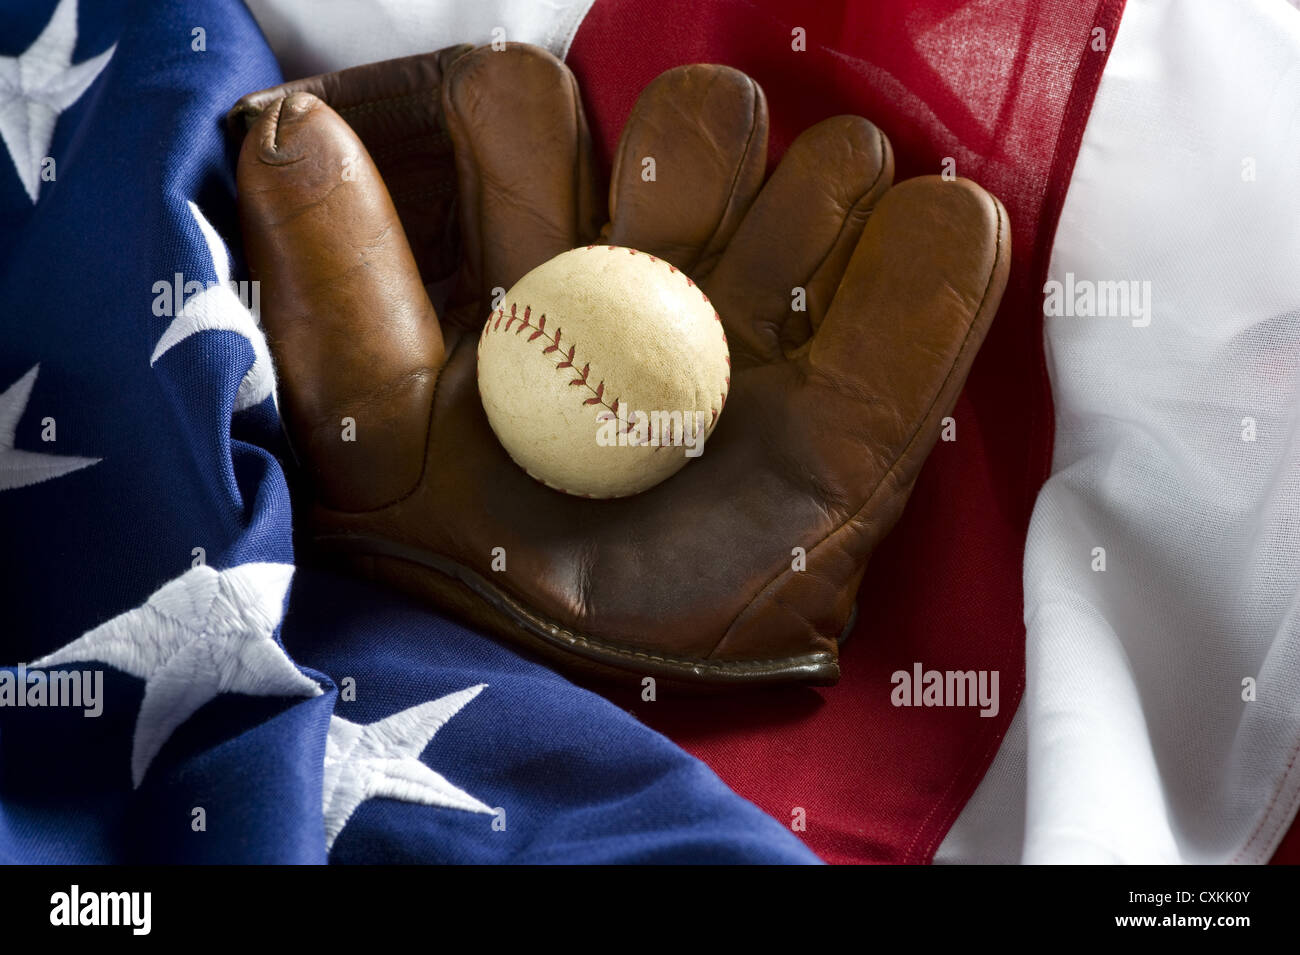 A grouping of classic baseball items including an antique glove or mitt and an antique baseball on top of an American Flag Stock Photo